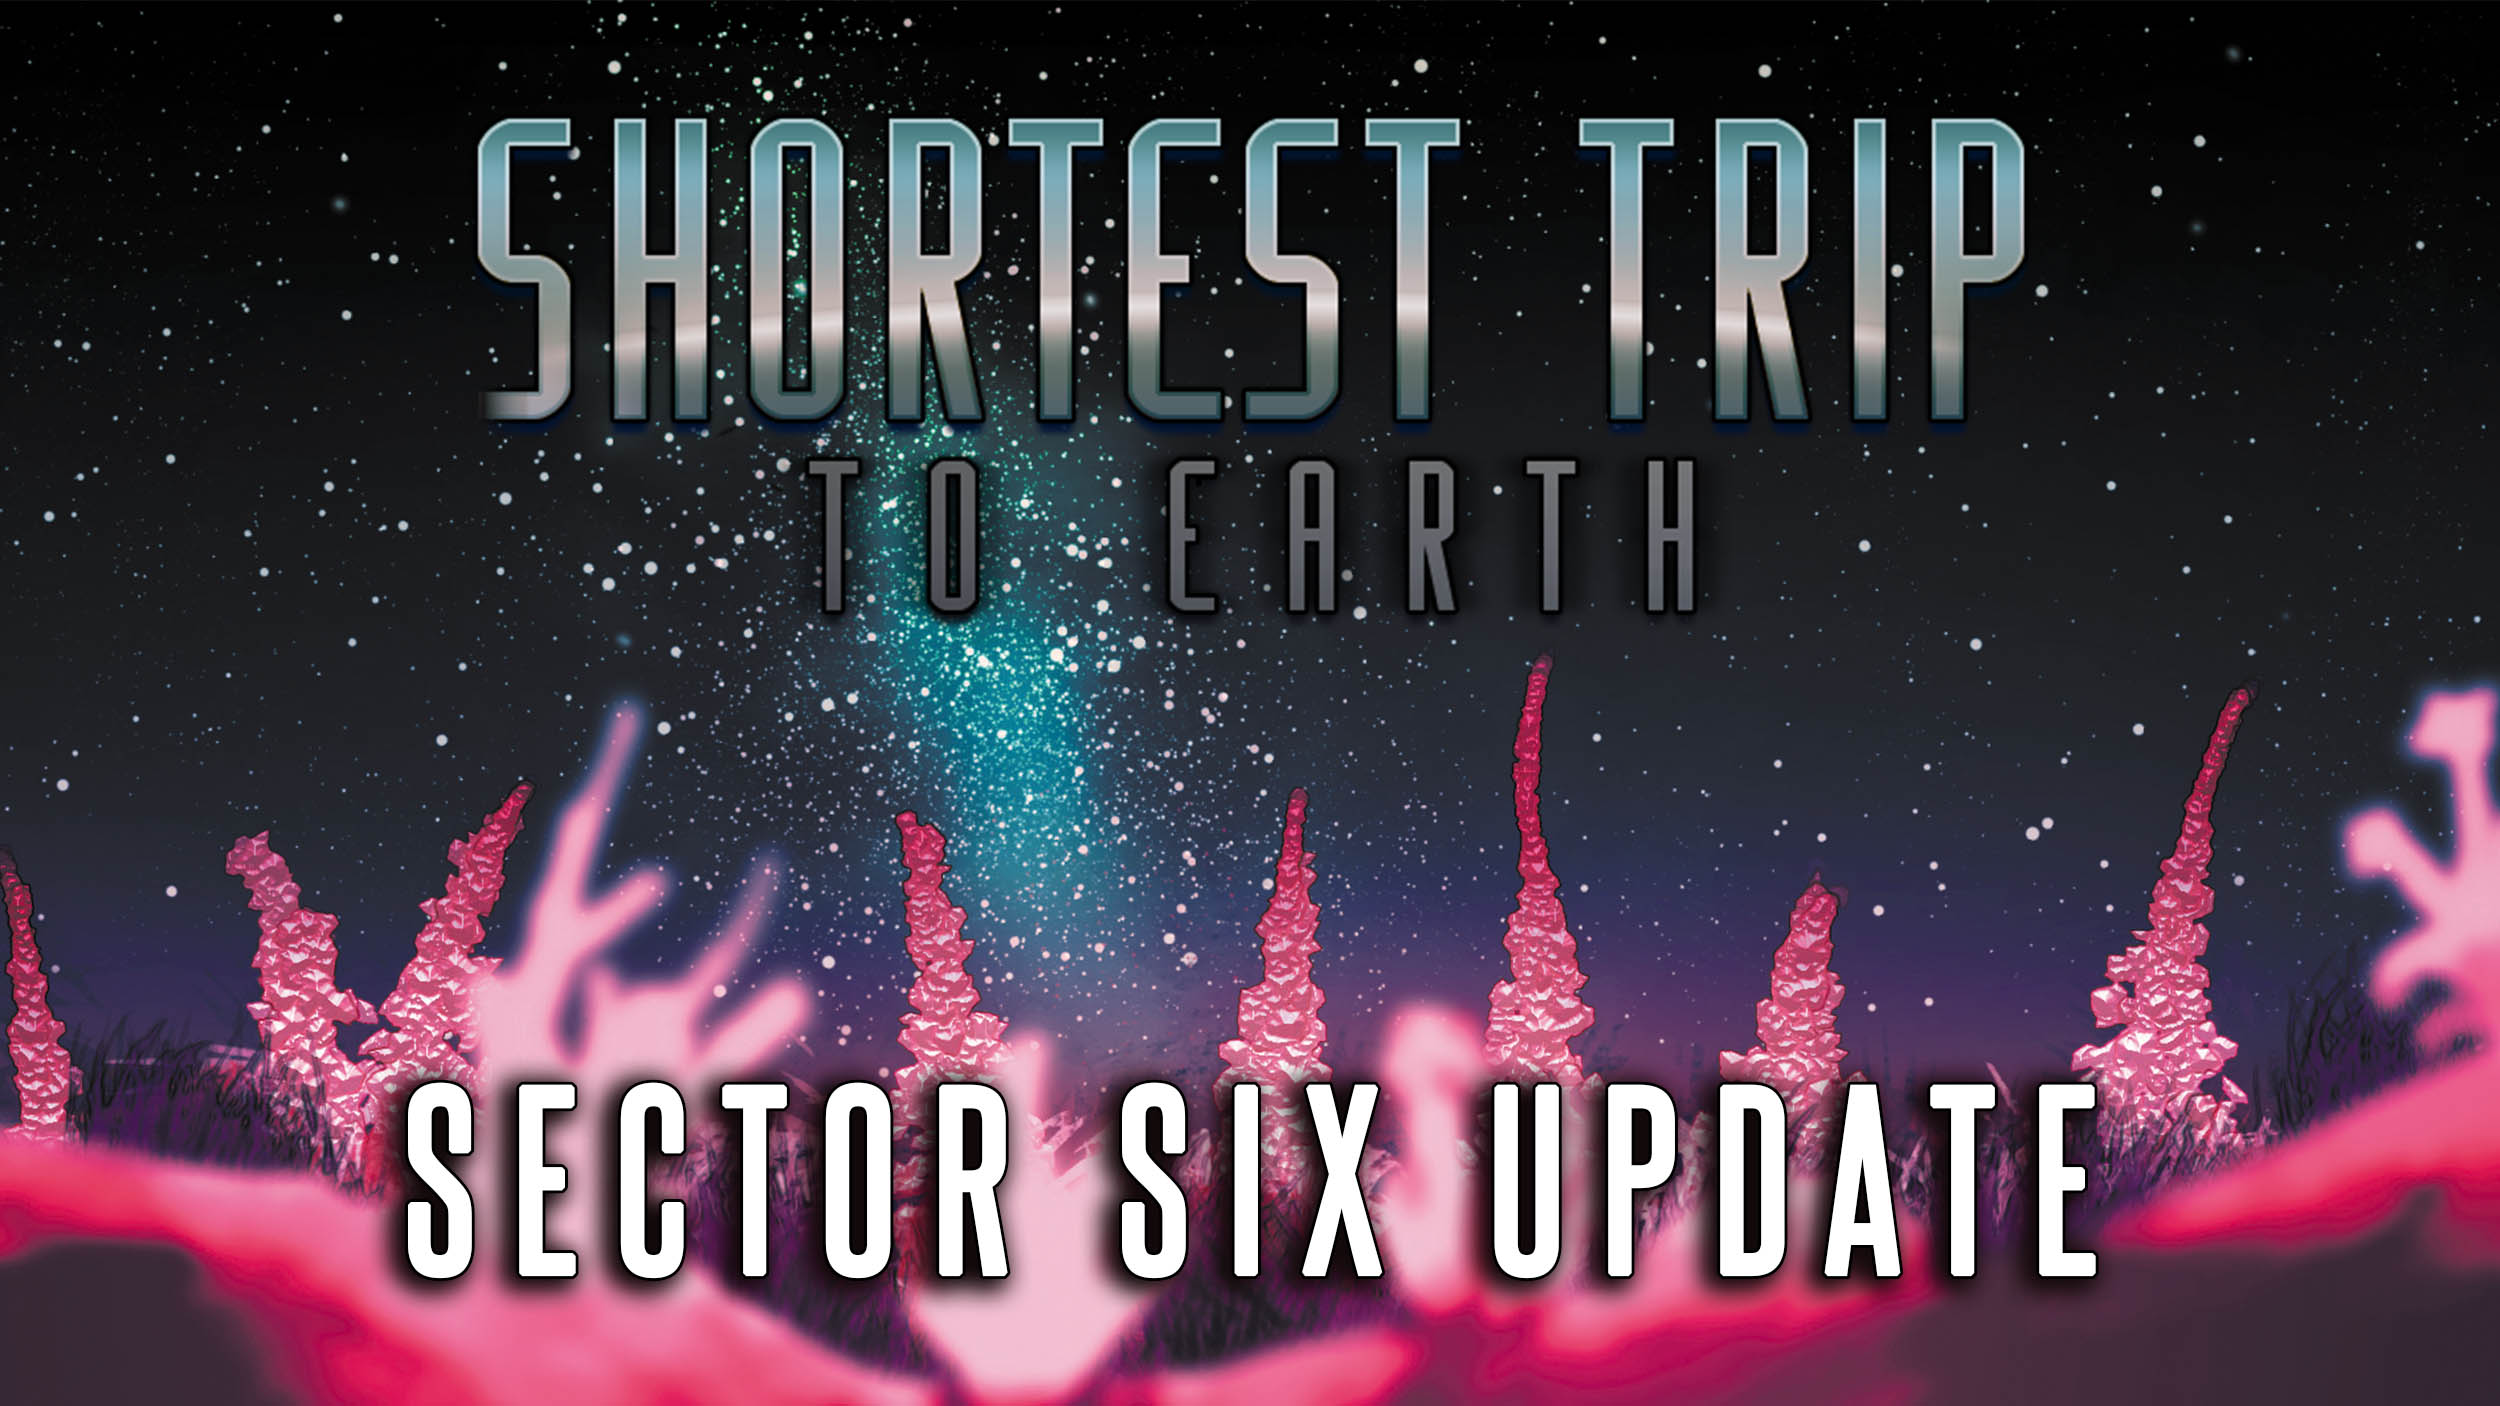 Shortest trip to earth